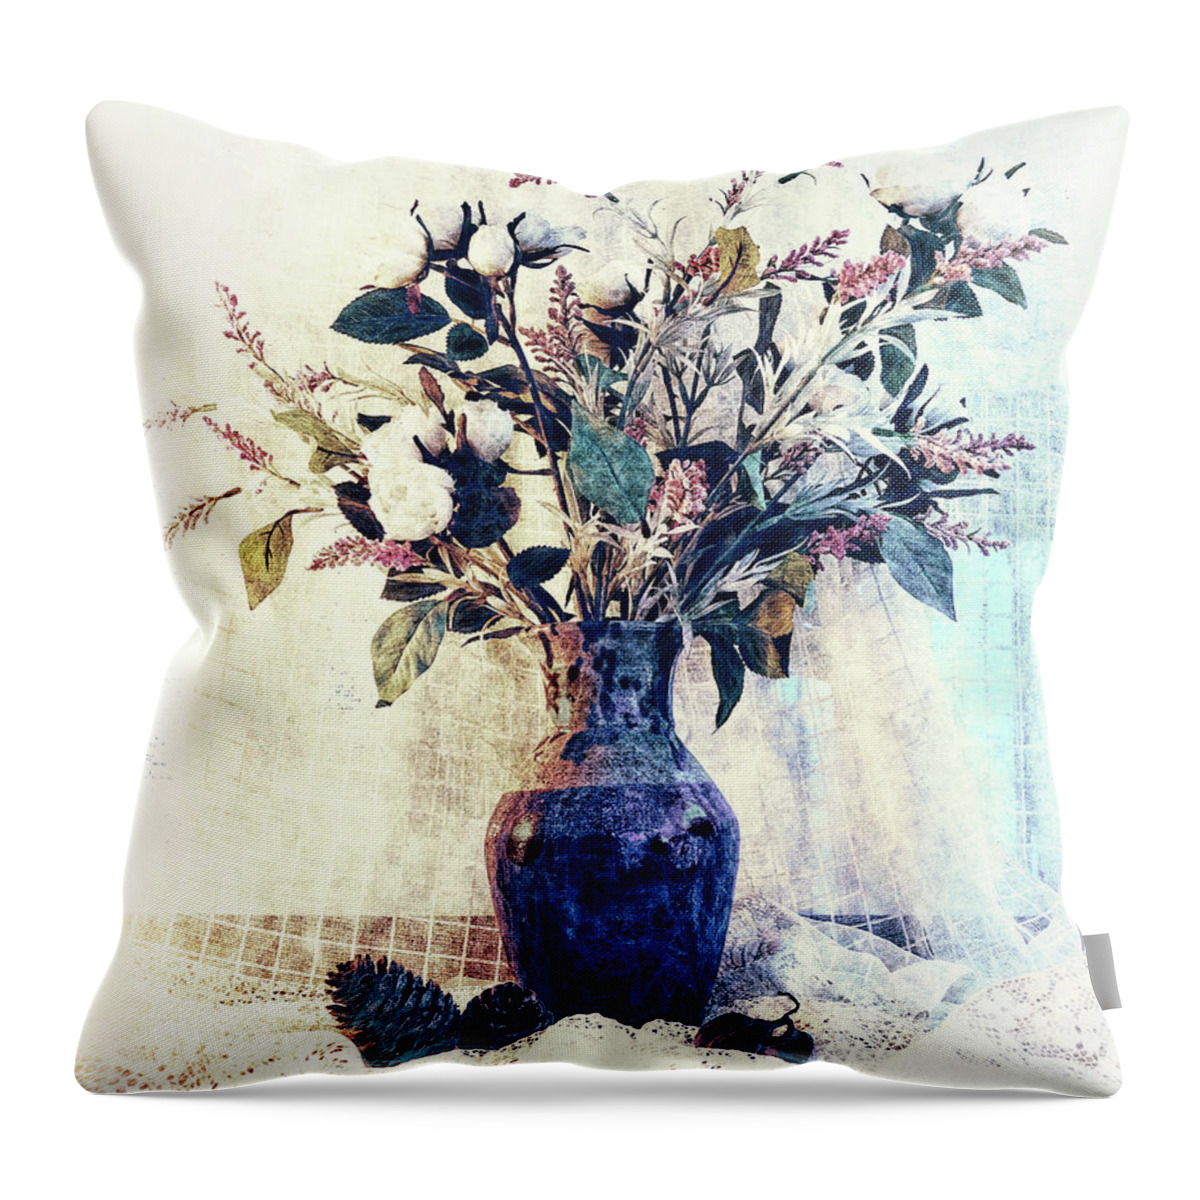 Still Life Throw Pillow featuring the photograph White Roses and Pine Cones by Sandra Selle Rodriguez